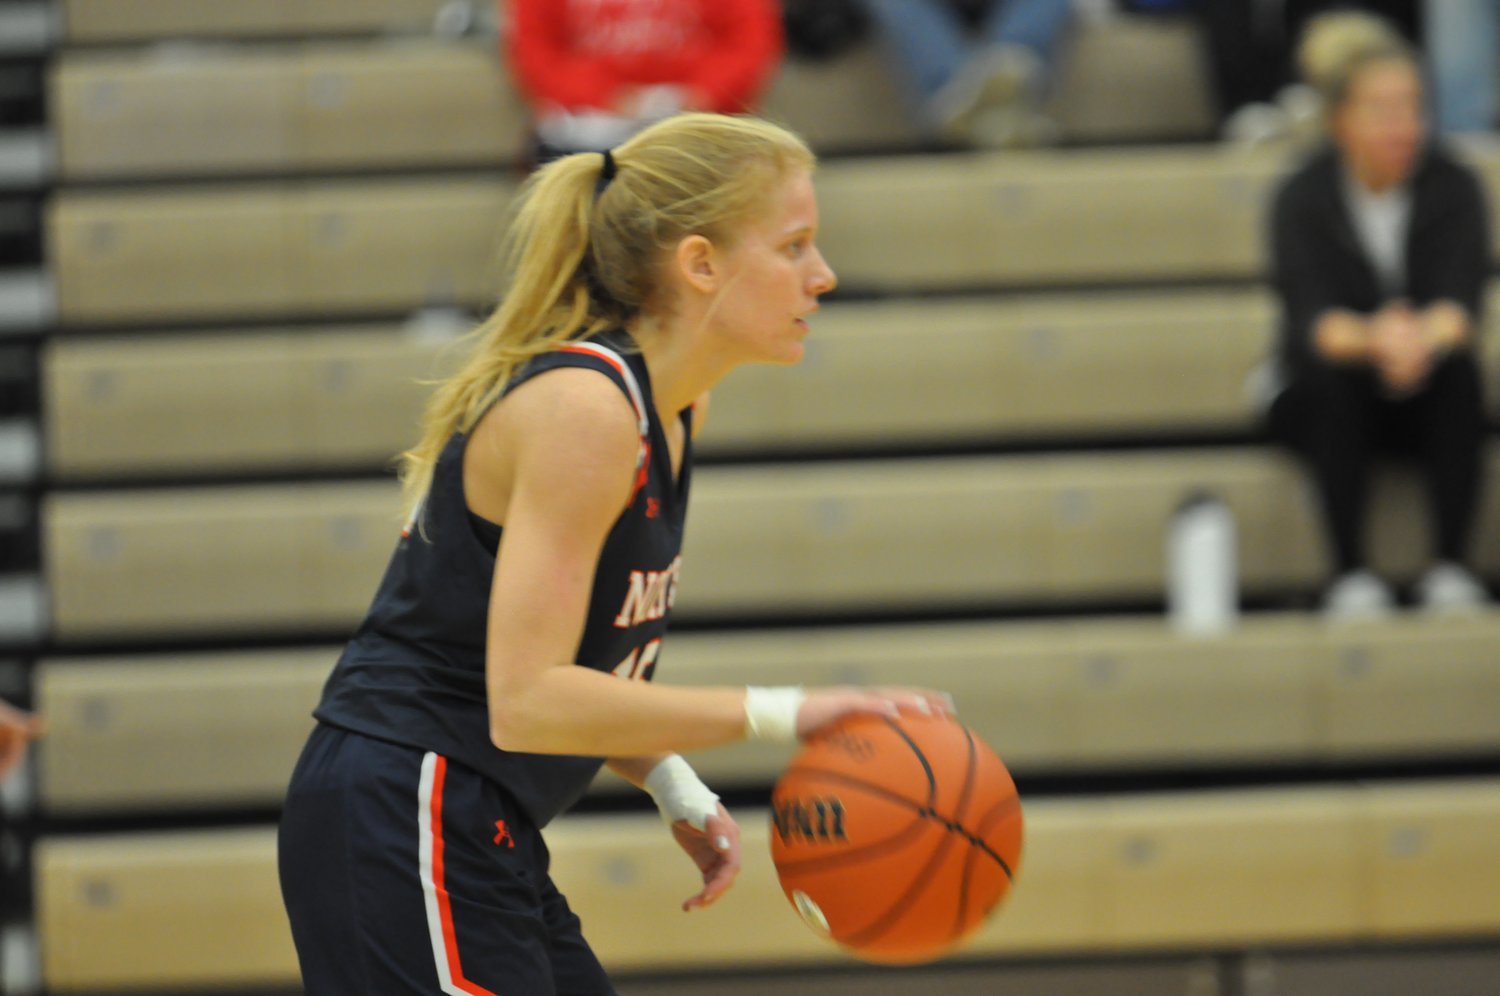 Madi Welch drained the game-winning 3 to defeat County Rival Crawfordsville 42-39.